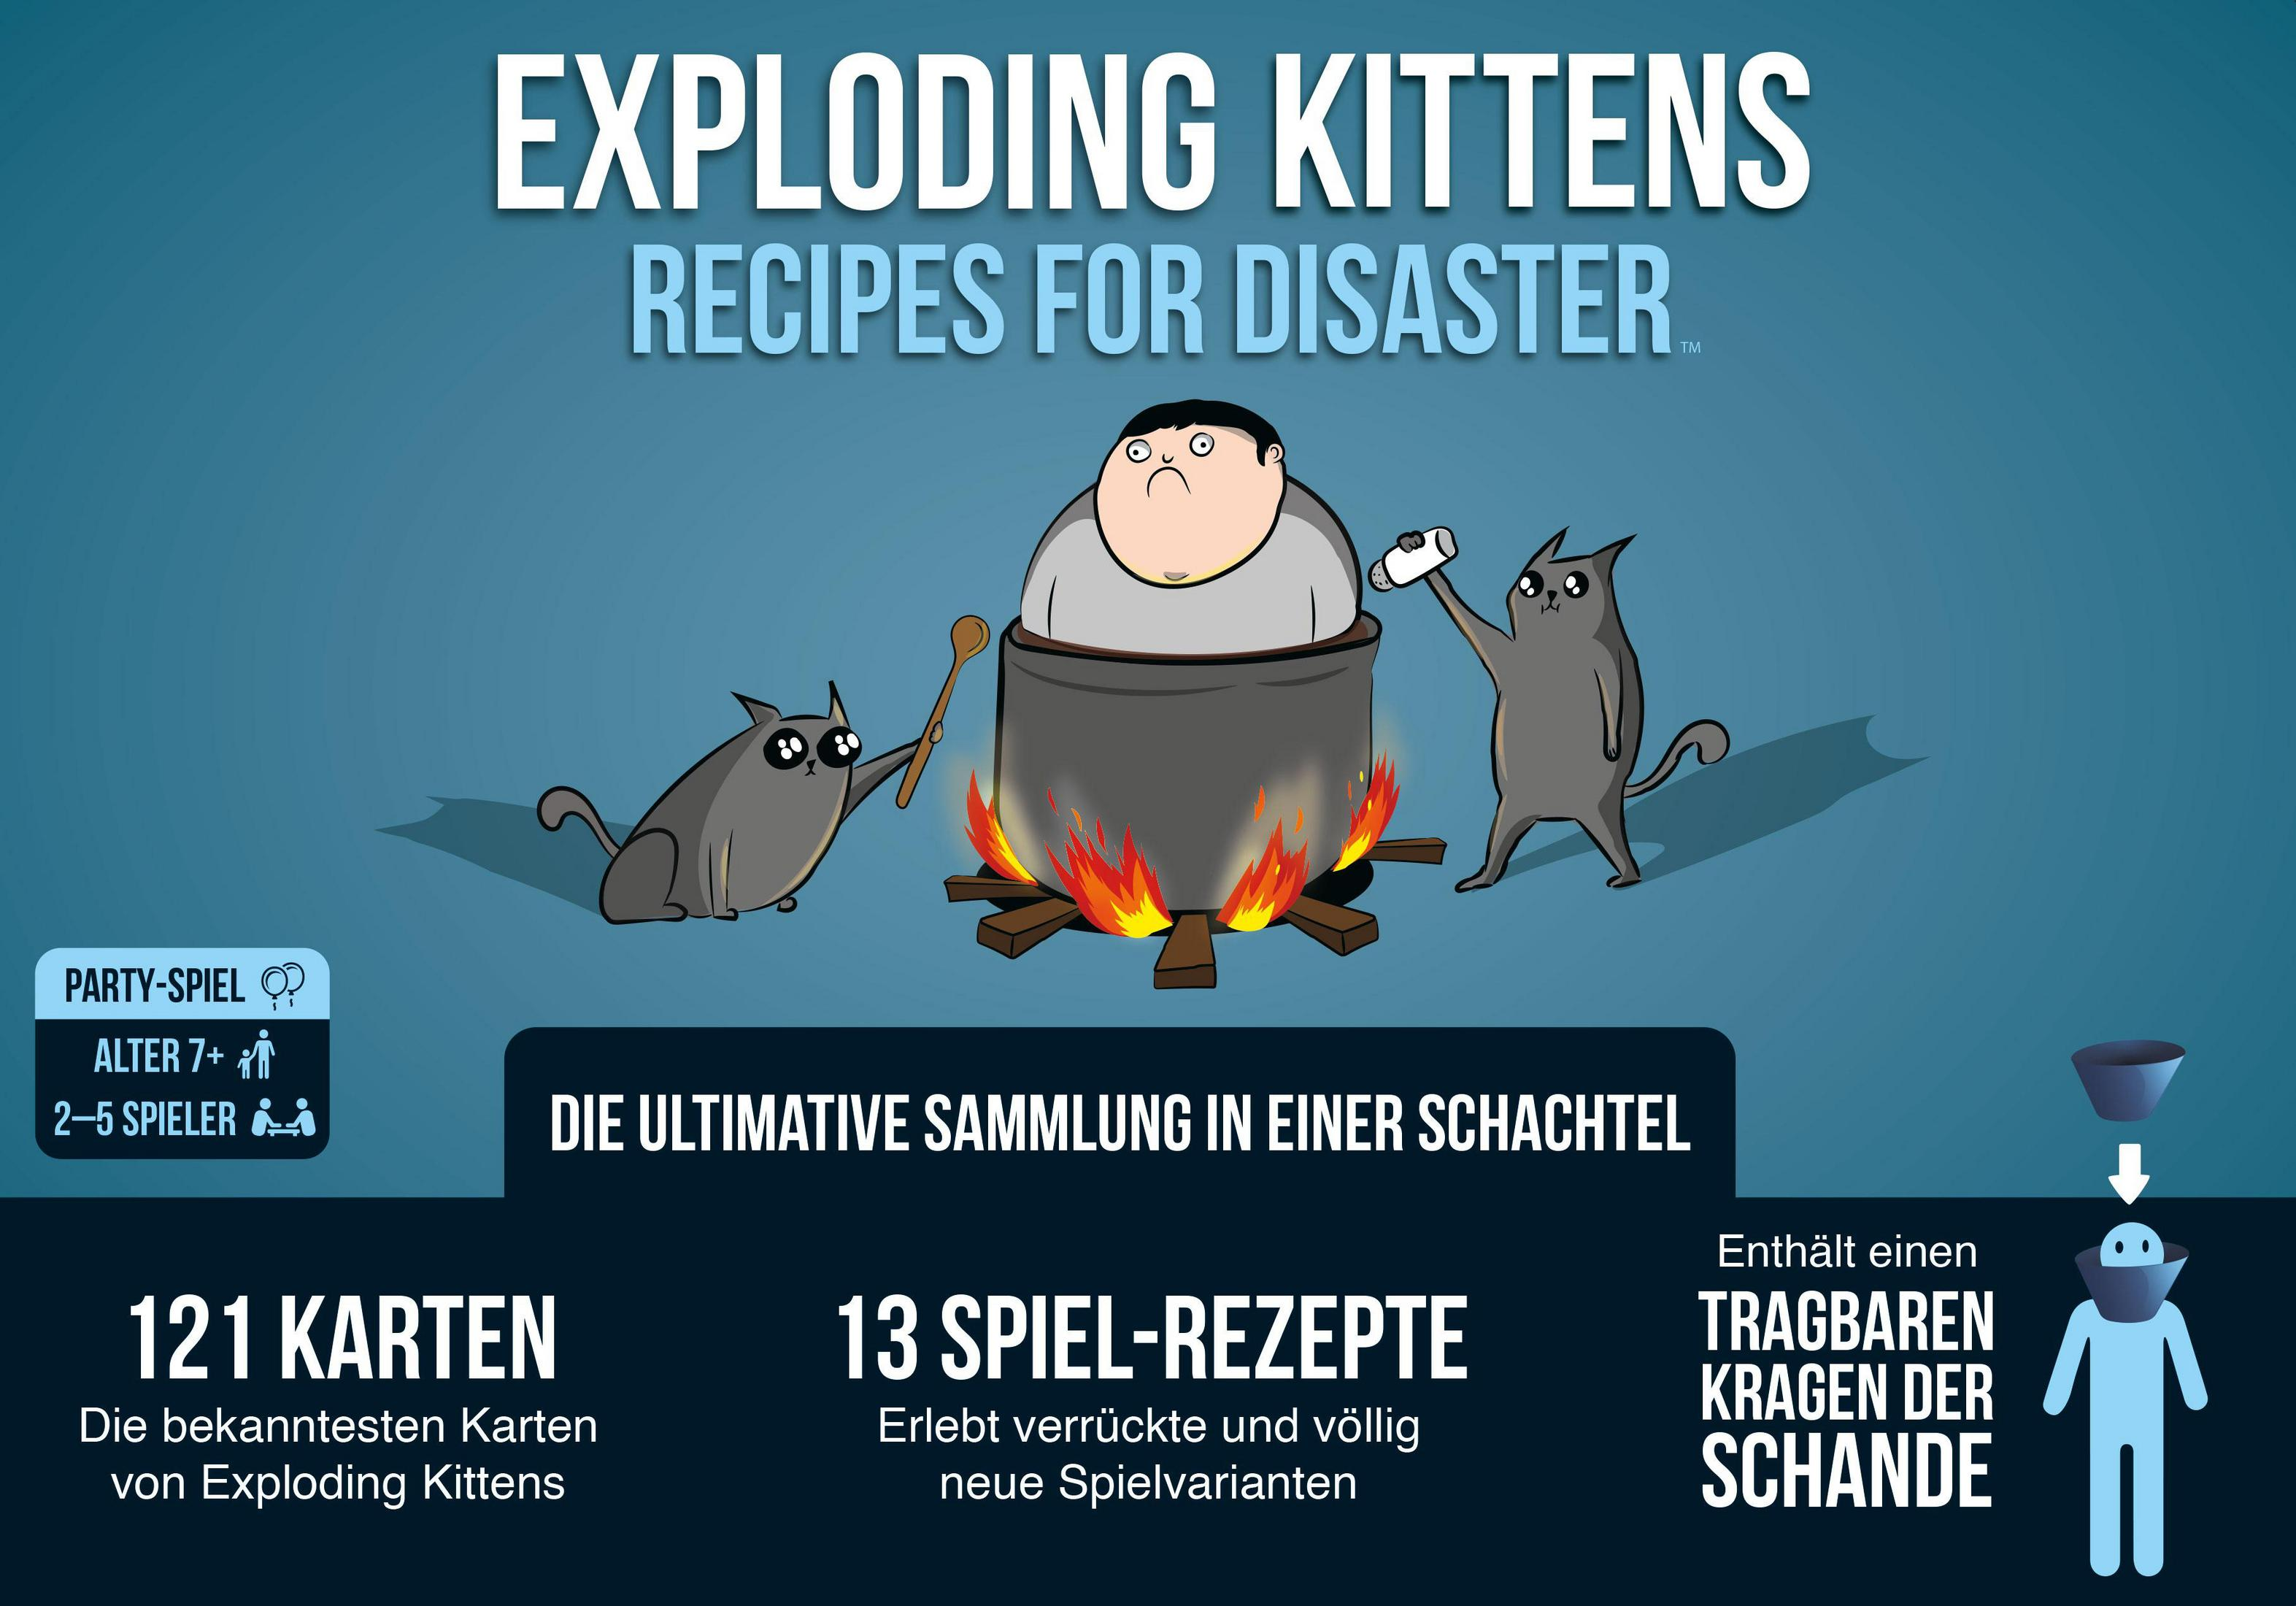 Partyspiel EXPLODING KITTENS: ASMODEE FOR EXKD0022 DISASTER RECIPES